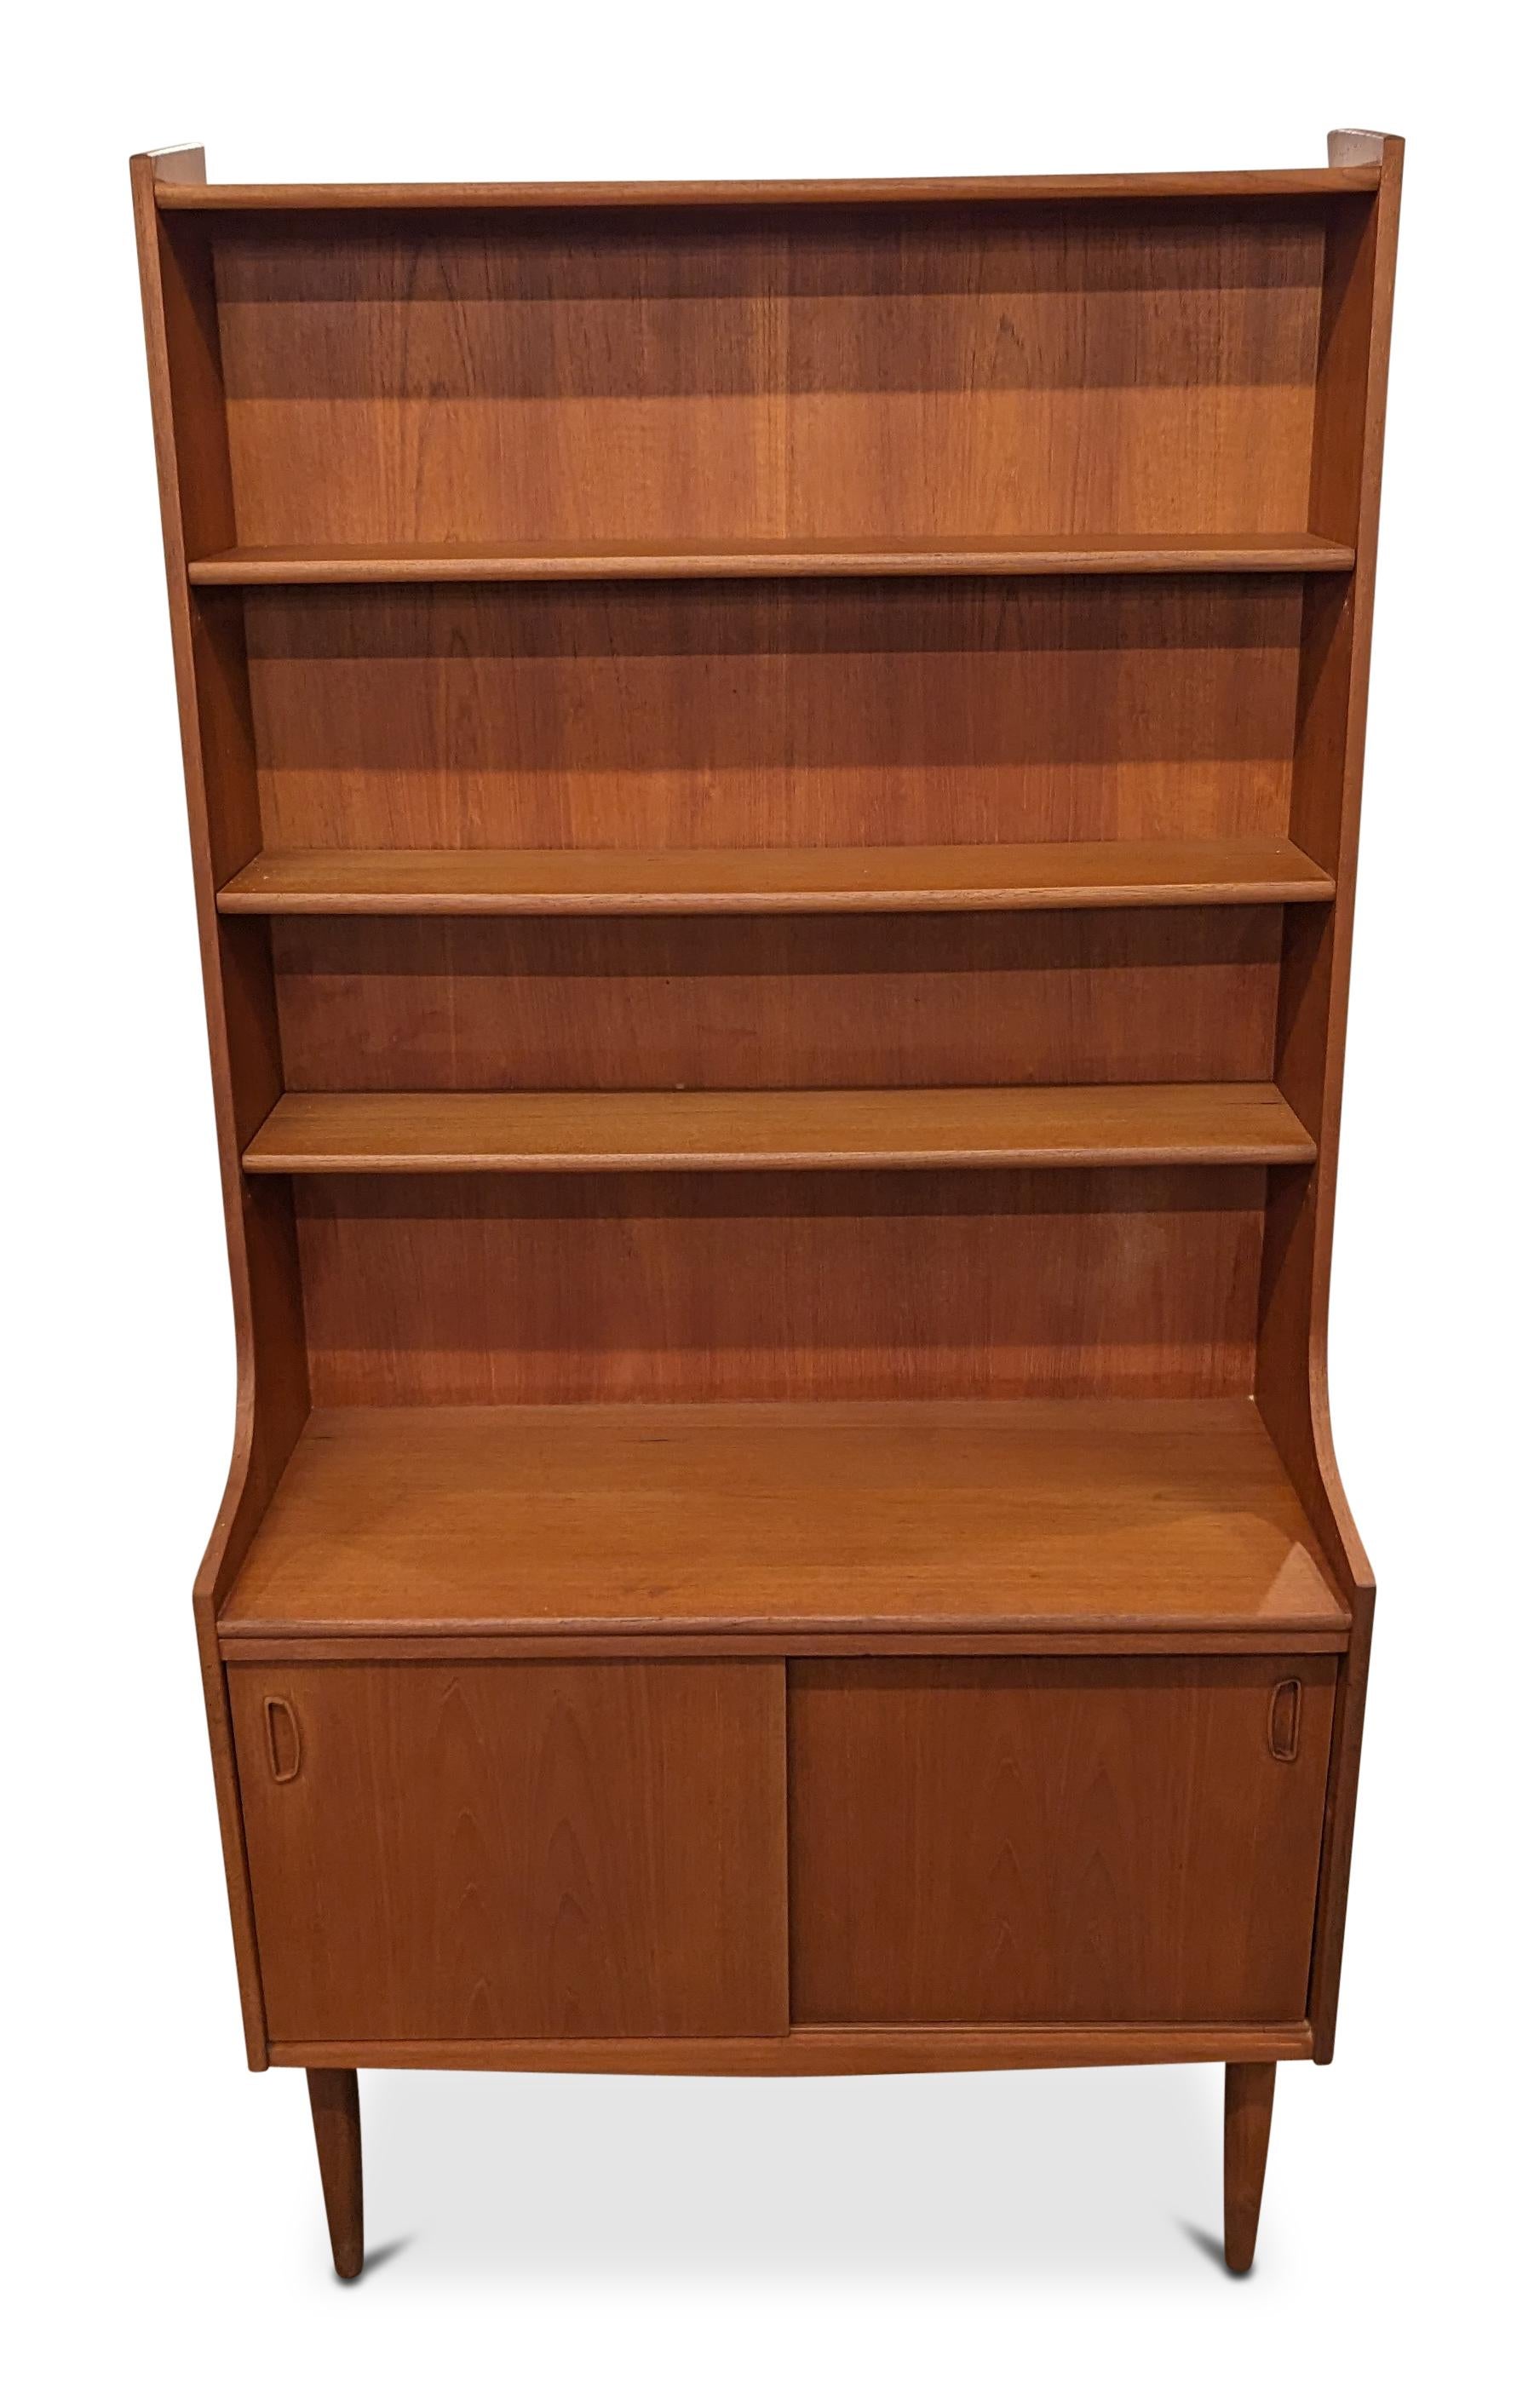 Vintage Danish Mid Century Teak Bookcase - 022411 In Good Condition For Sale In Jersey City, NJ